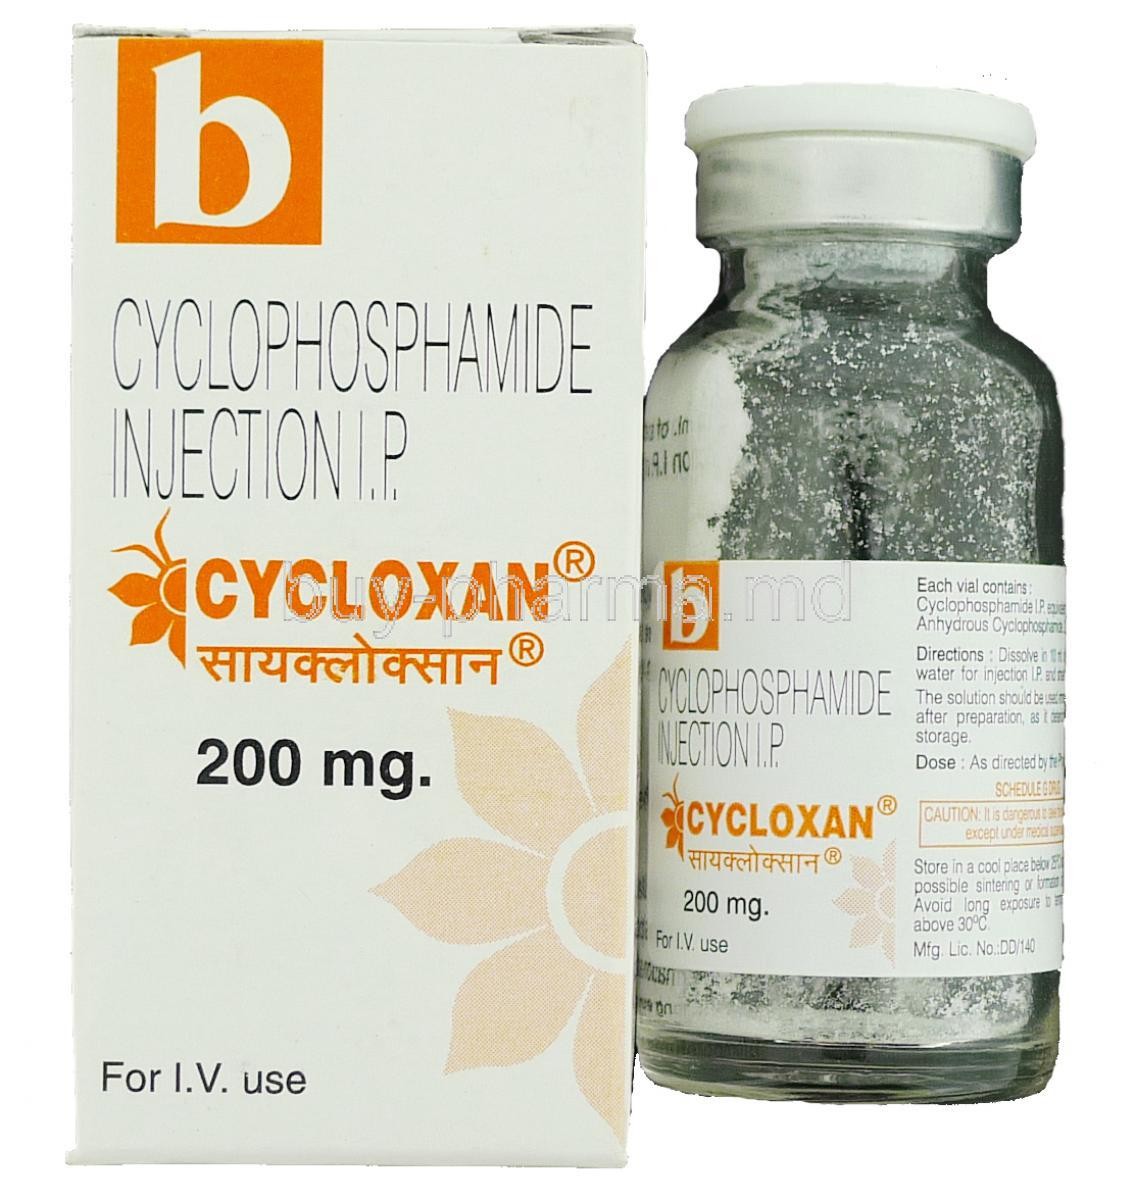 CYCLOPHOSPHAMIDE - ORAL Cytoxan side effects medical uses and drug interactions